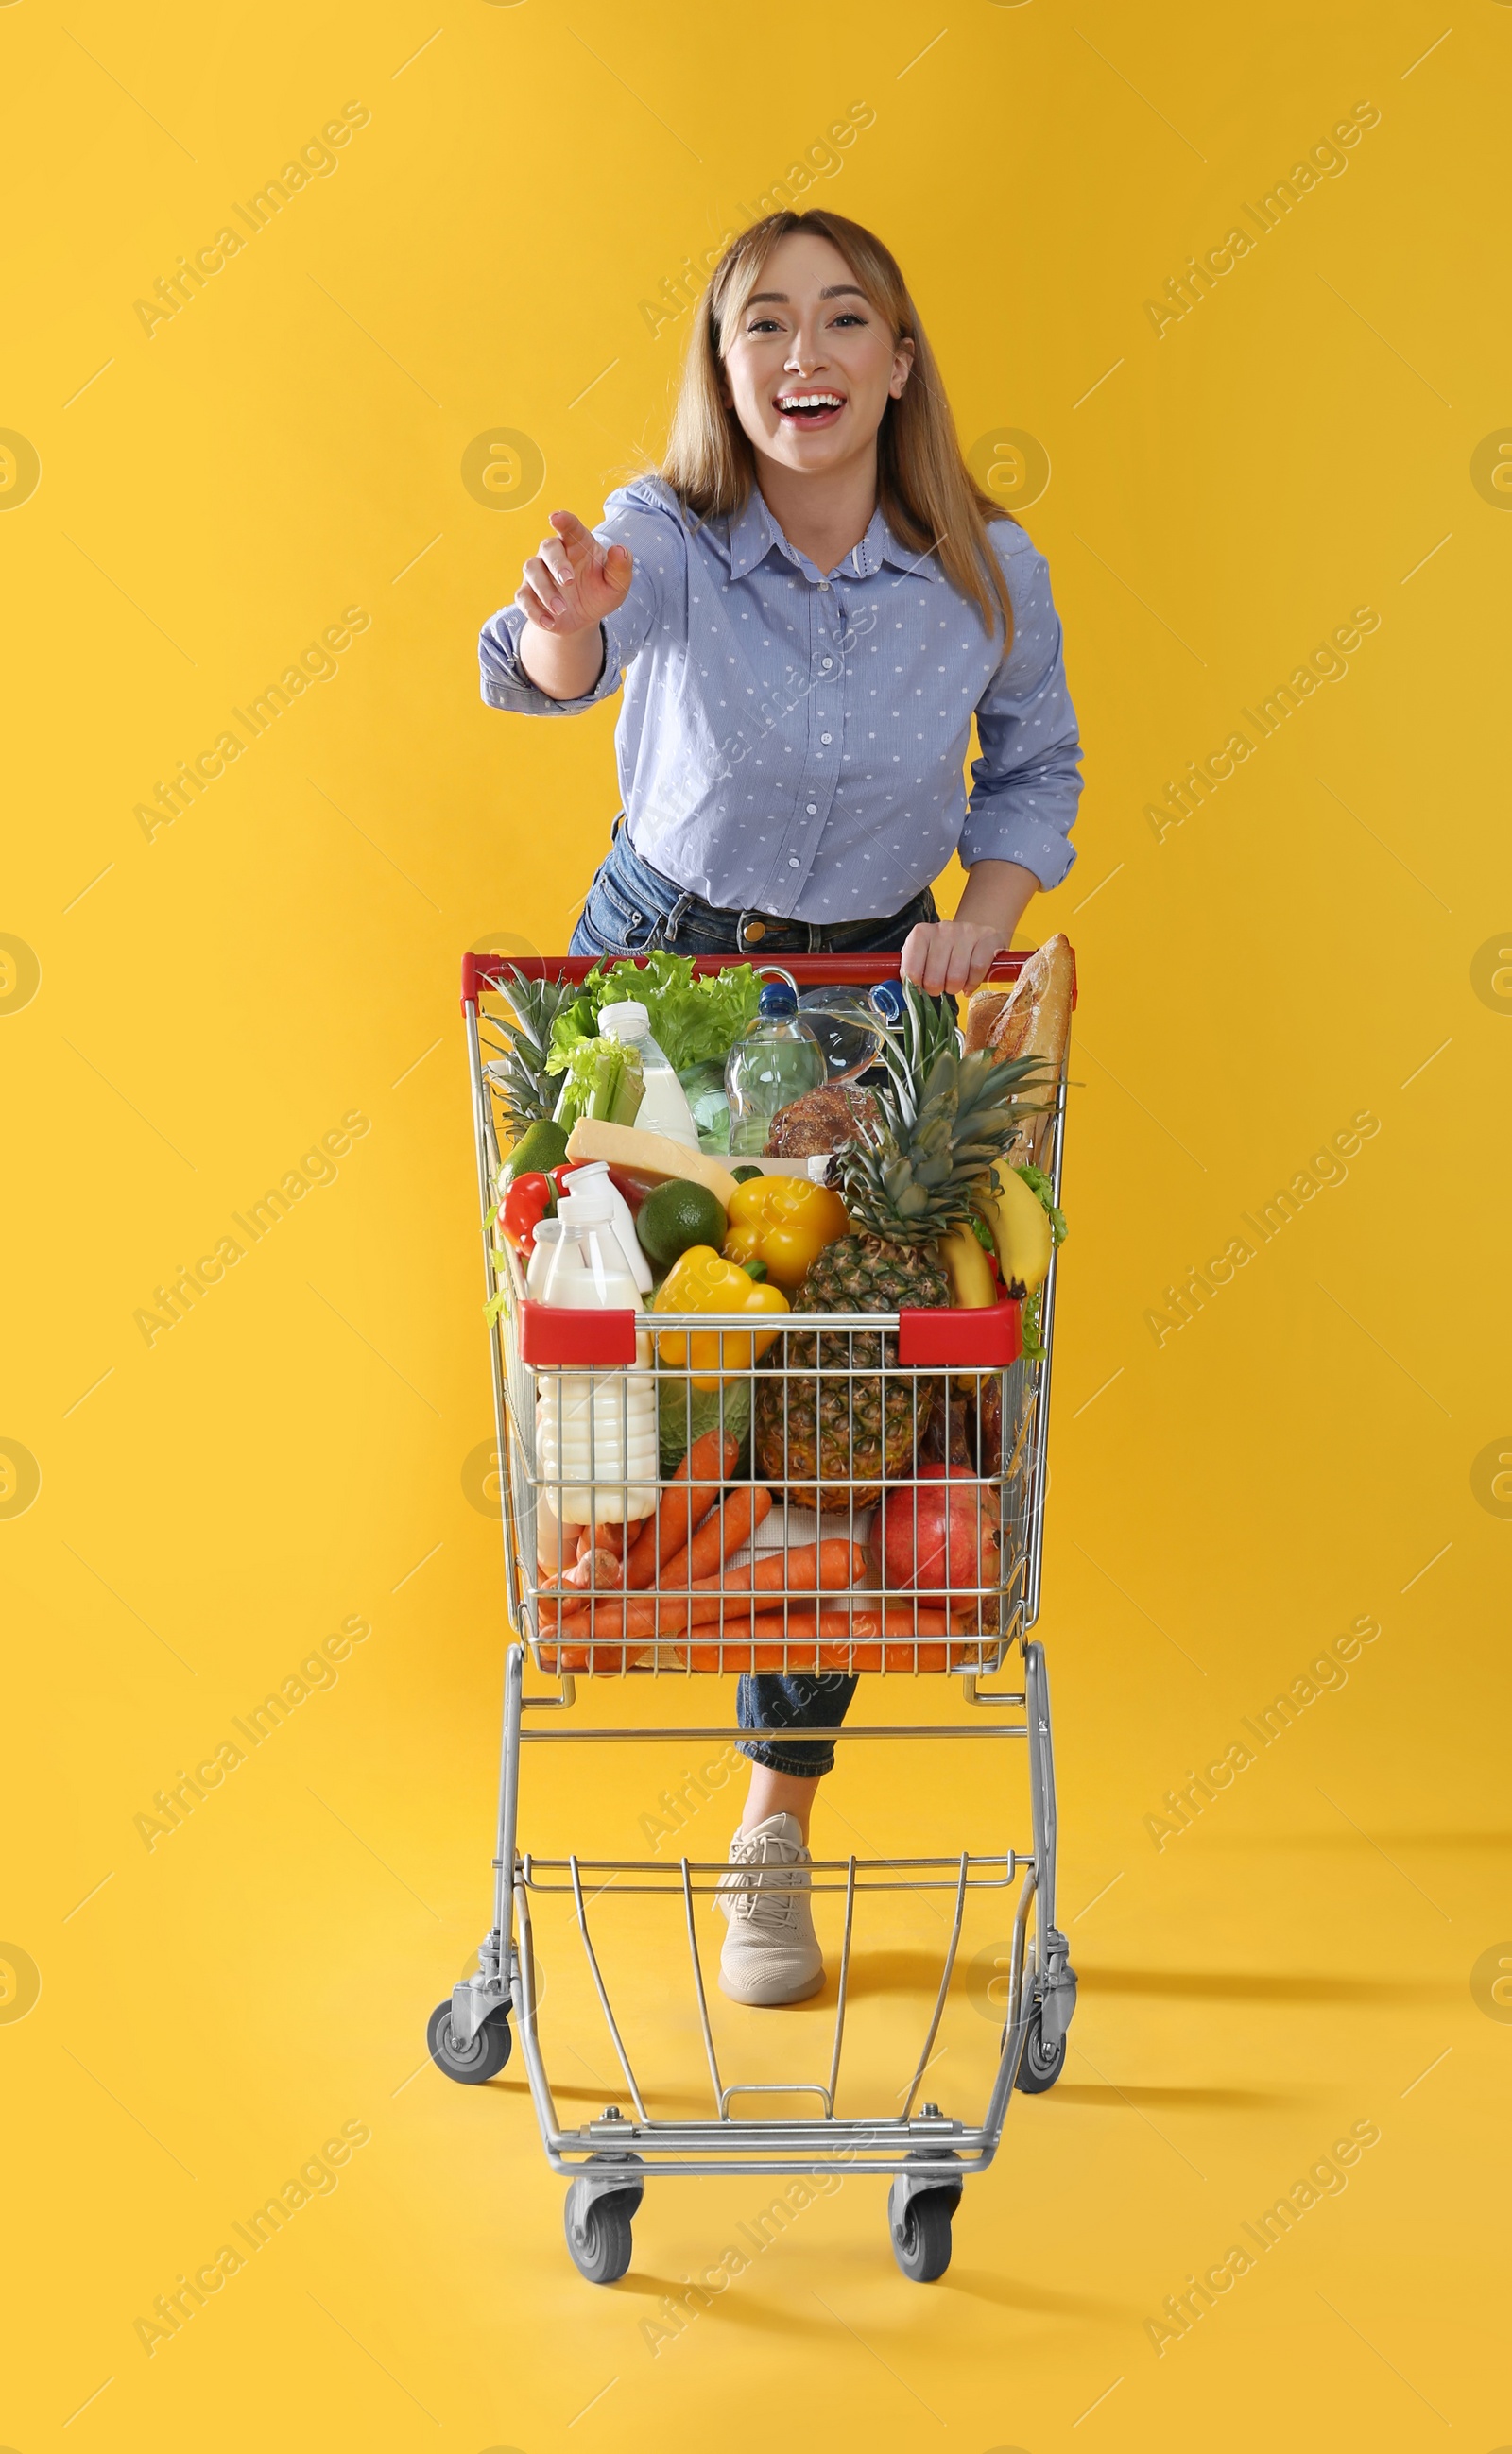 Photo of Young woman with shopping cart full of groceries on yellow background